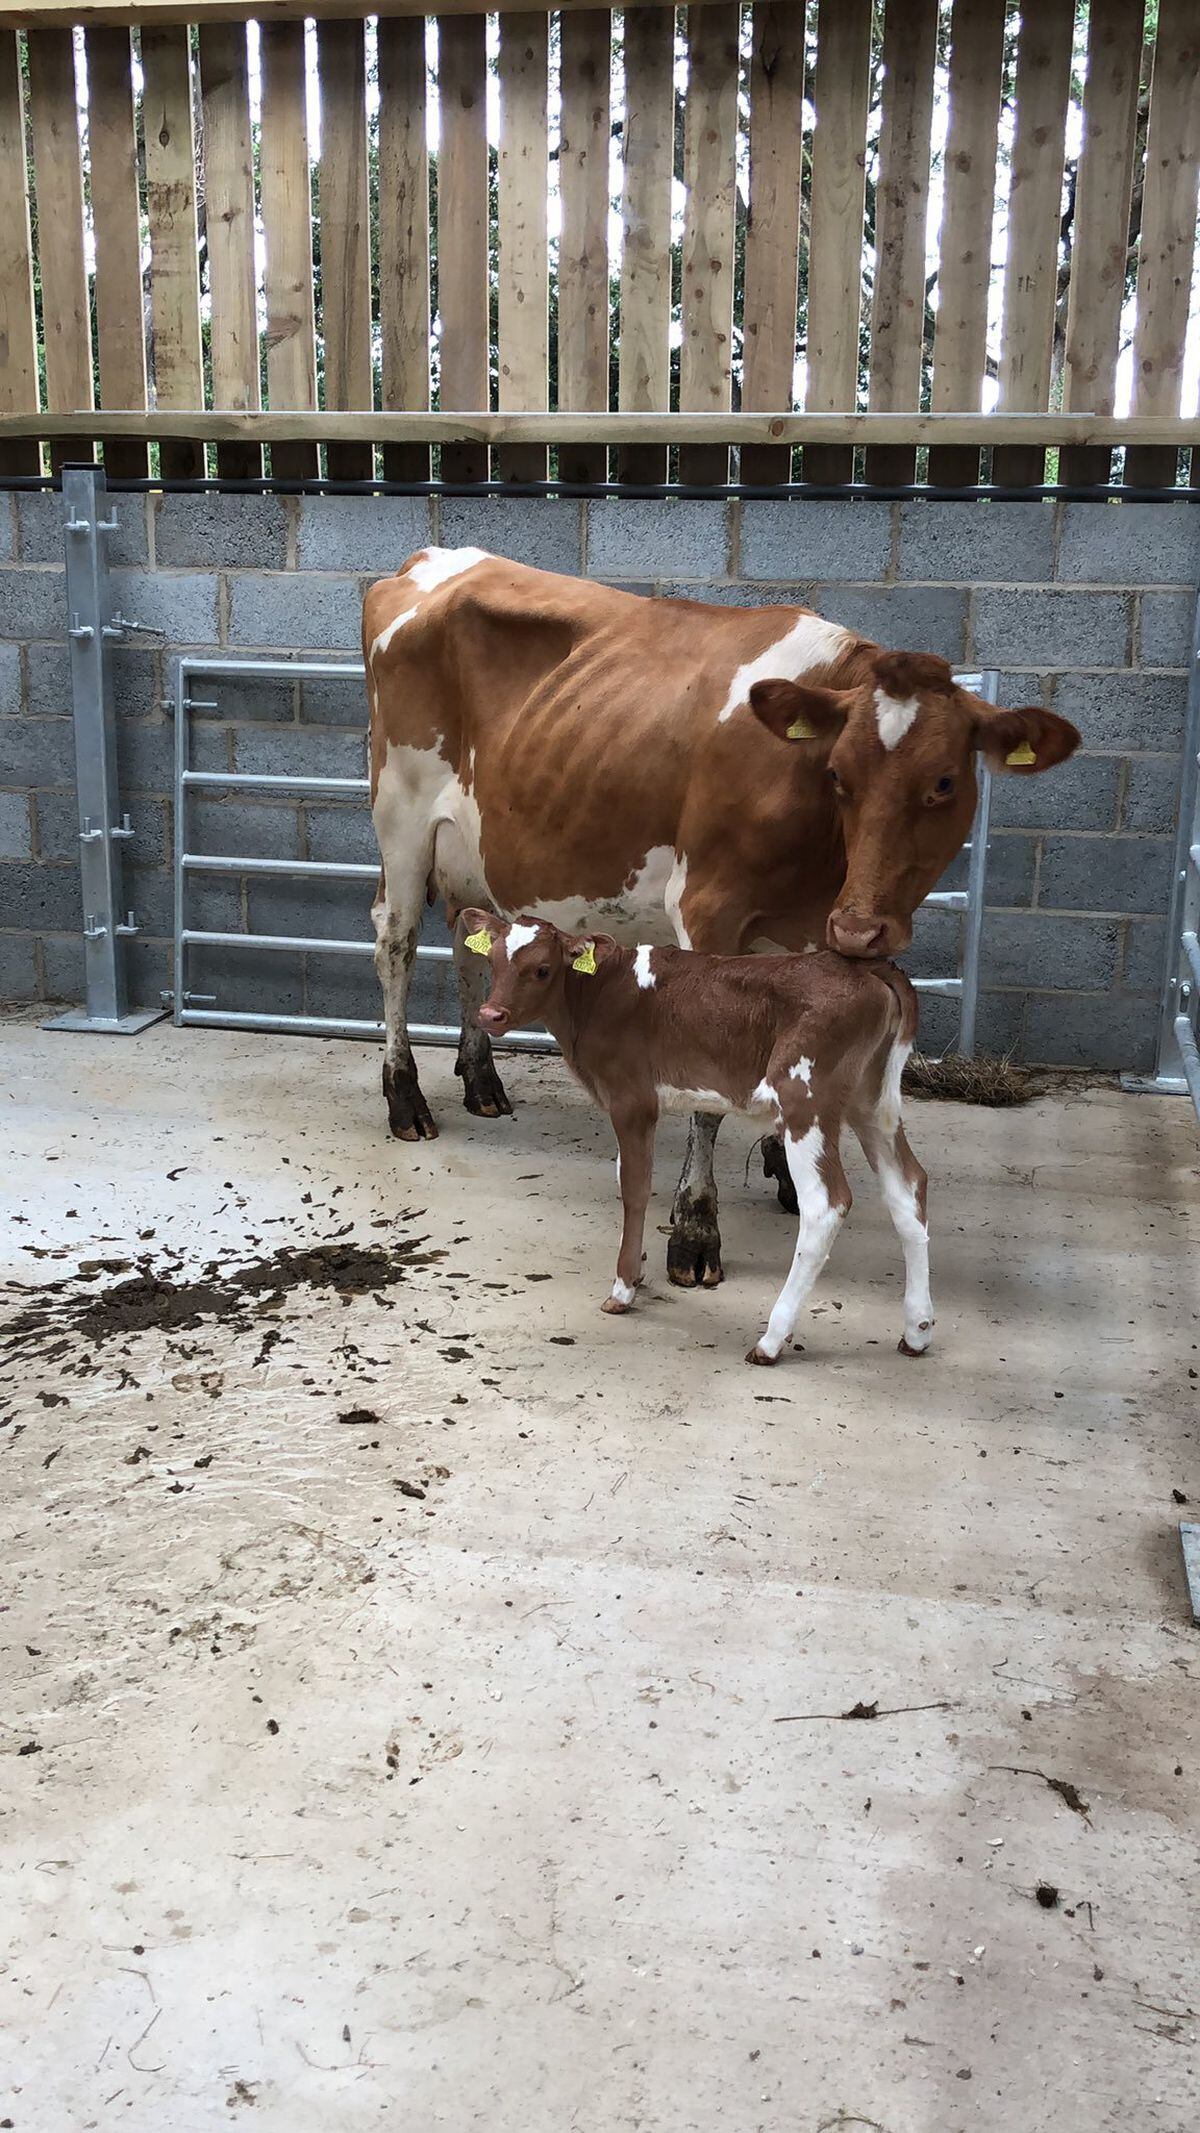 Venus, the first calf in Sark’s herd of cattle, was transported there from Guernsey with mother Daisy last week. (Picture supplied by Seigneur of Sark Christopher Beaumont)